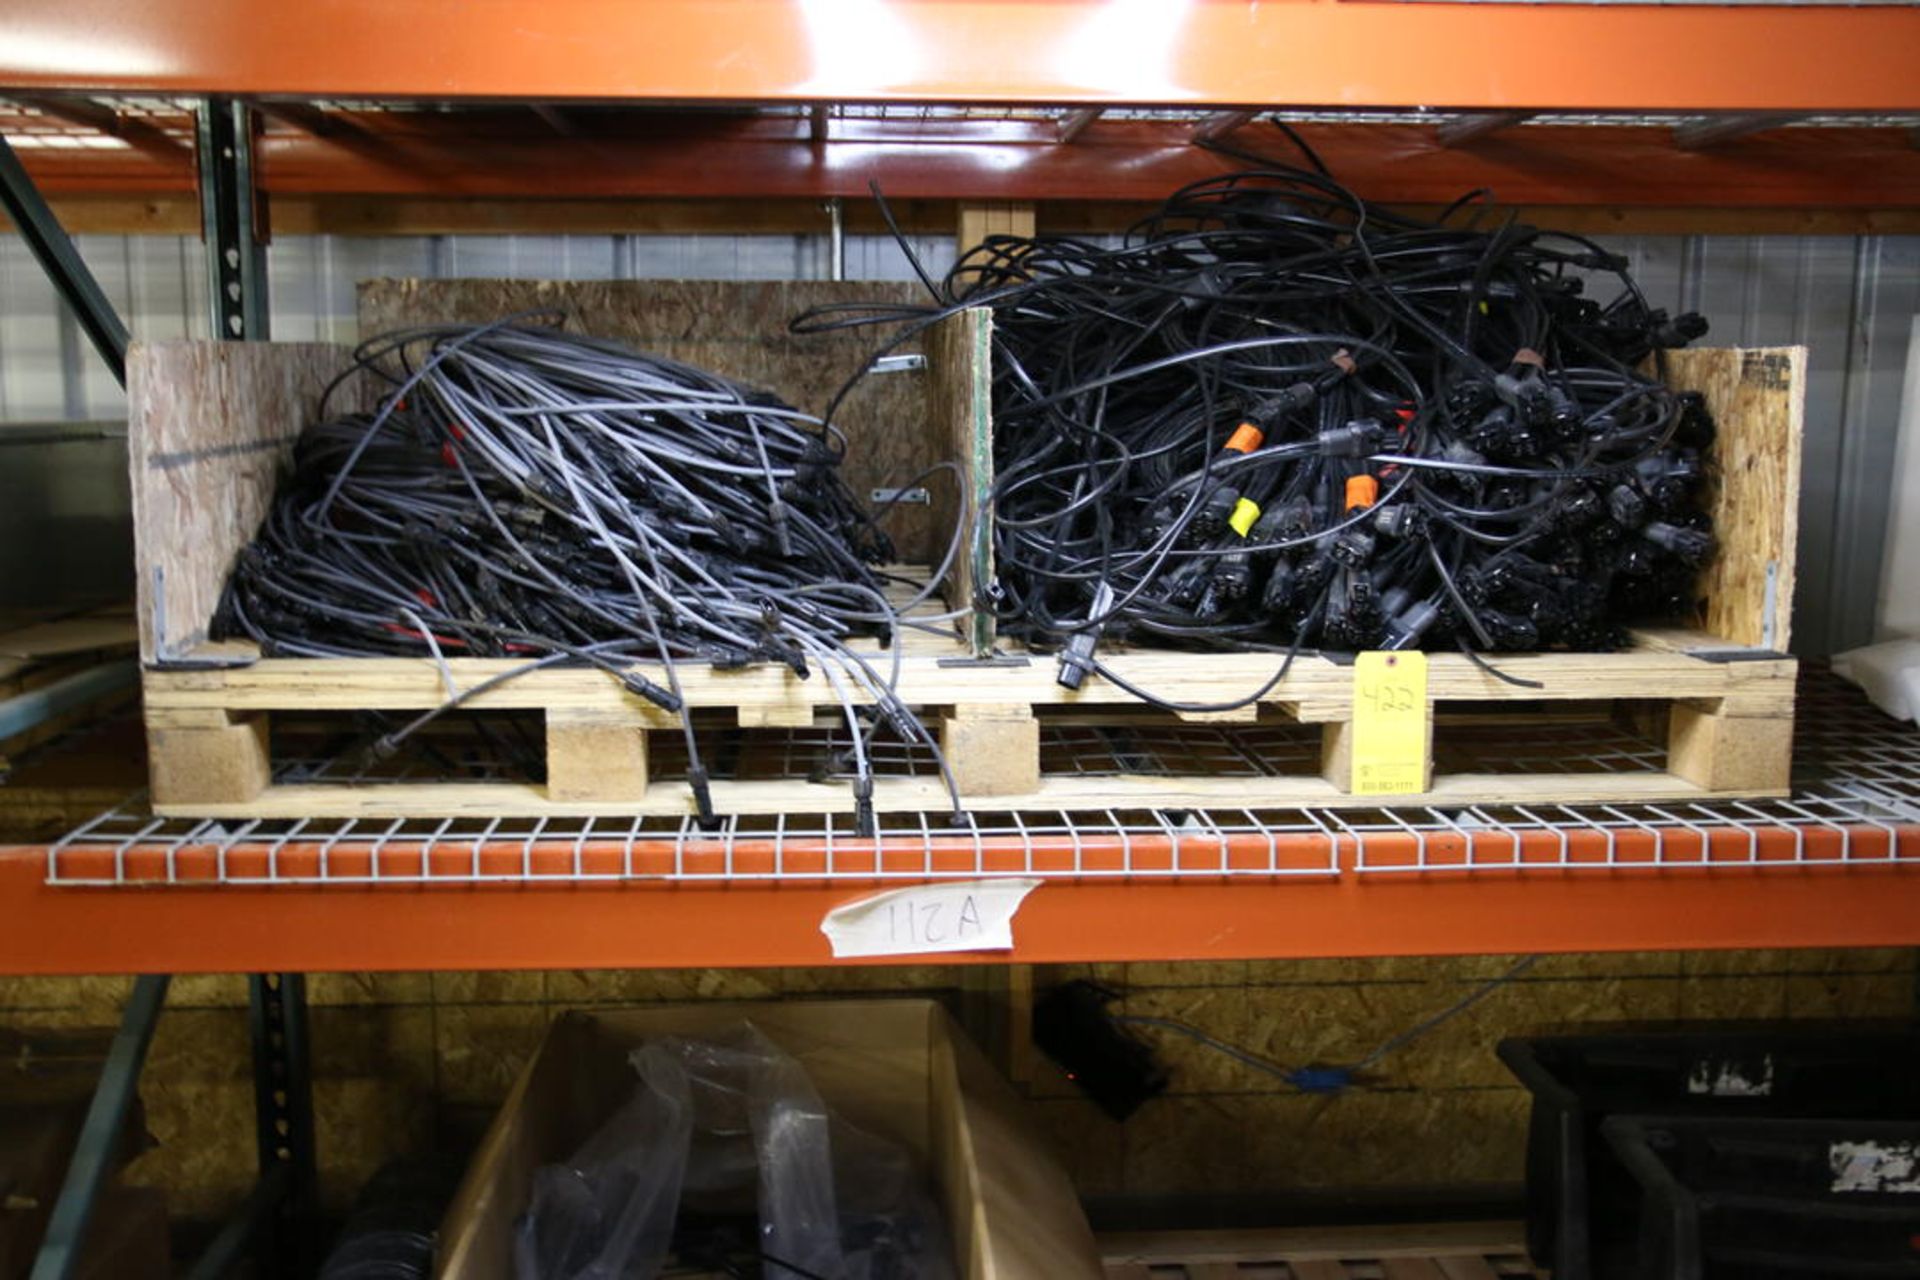 Pallet of IQ Cables and Advanced Digital Cables